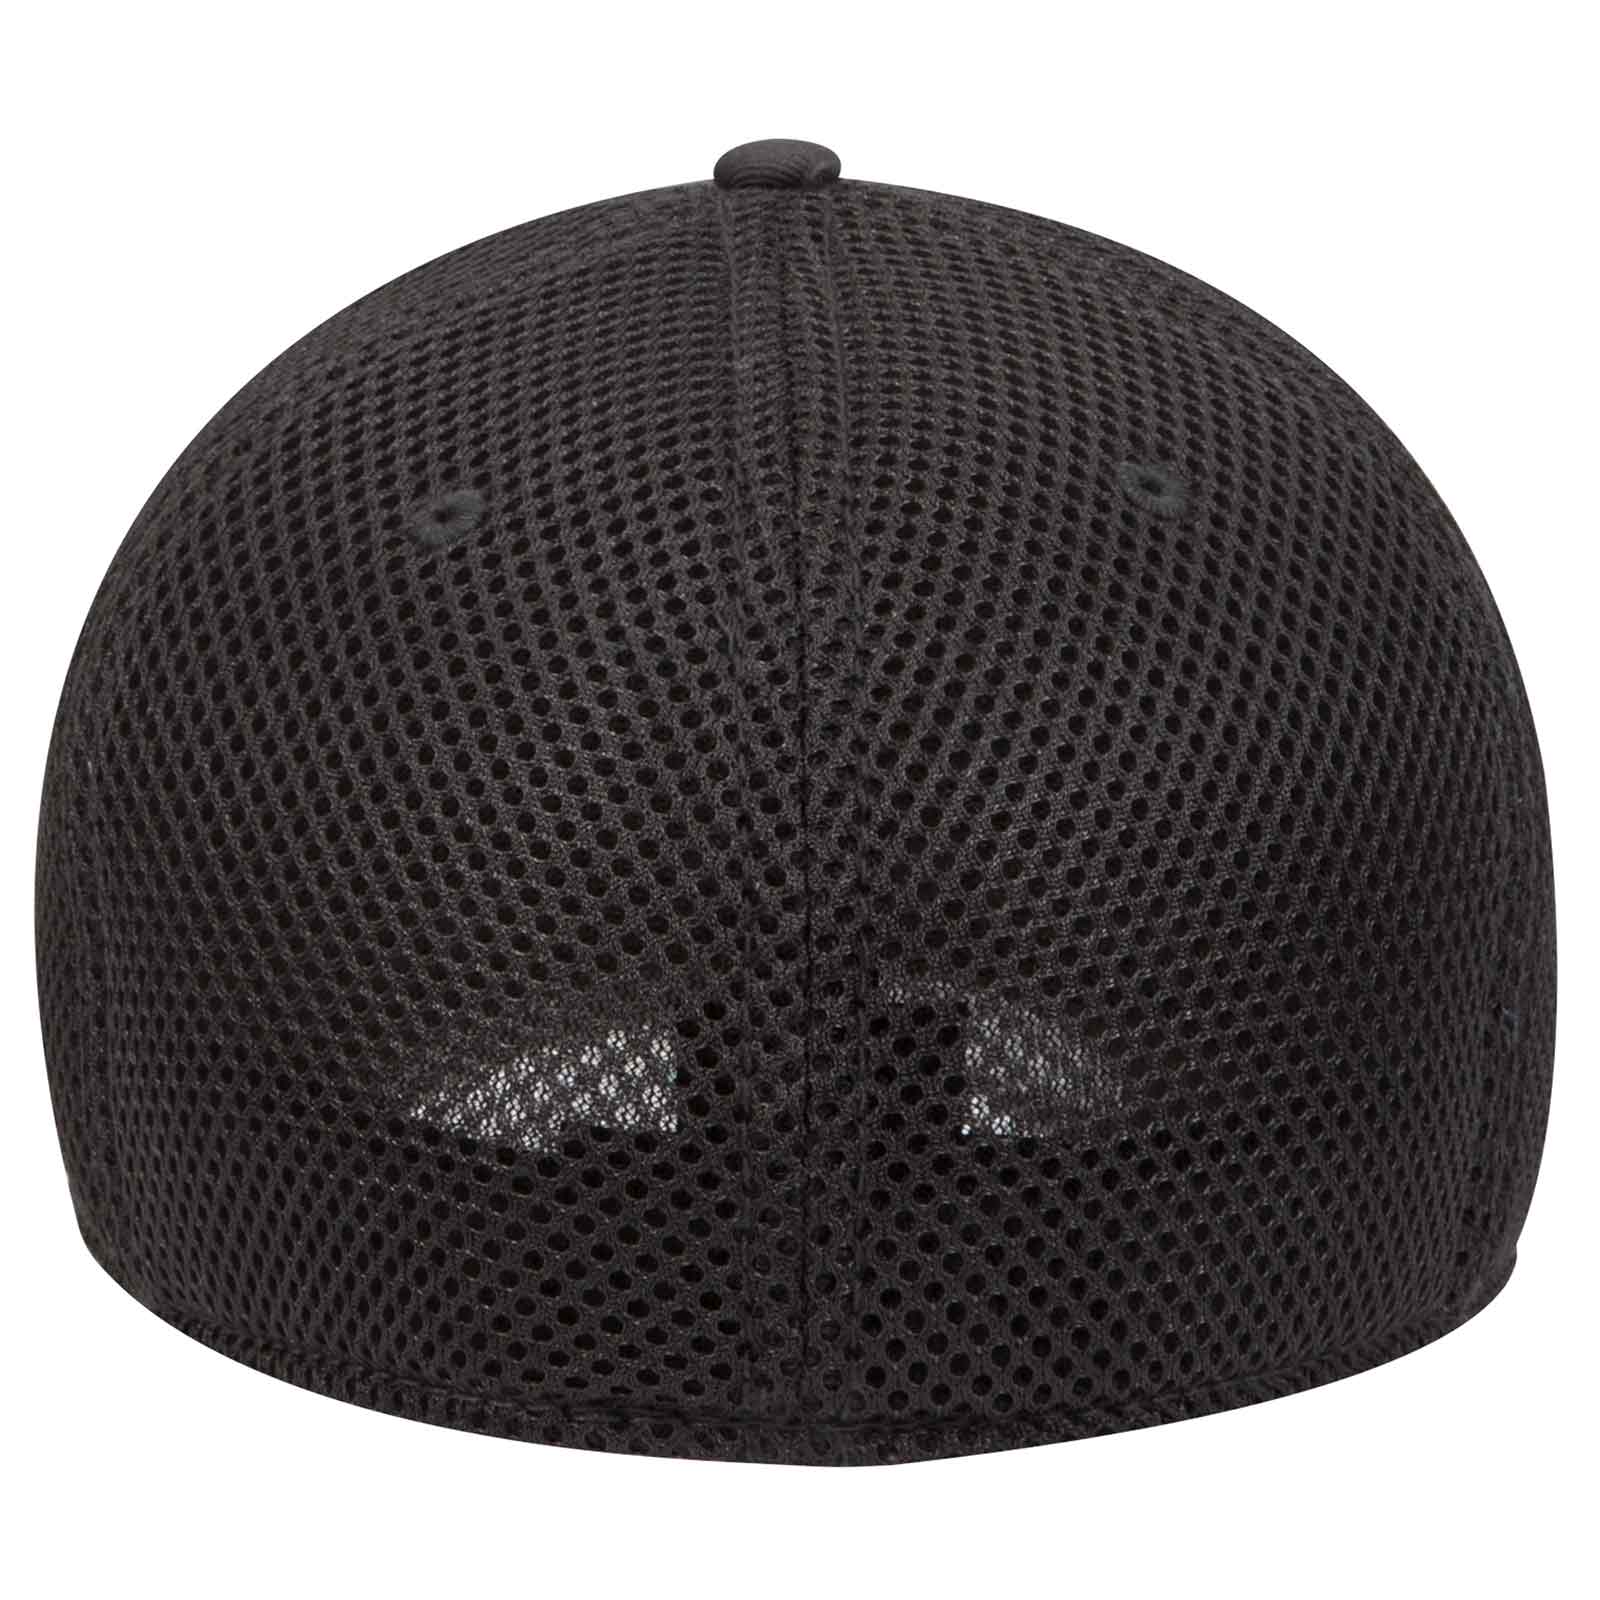 OTTO 11-1169 Cotton Twill w/ Stretchable Polyester Air Mesh Back "OTTO Flex" 6 Panel Low Profile Baseball Cap - Charcoal Gray - HIT a Double - 1